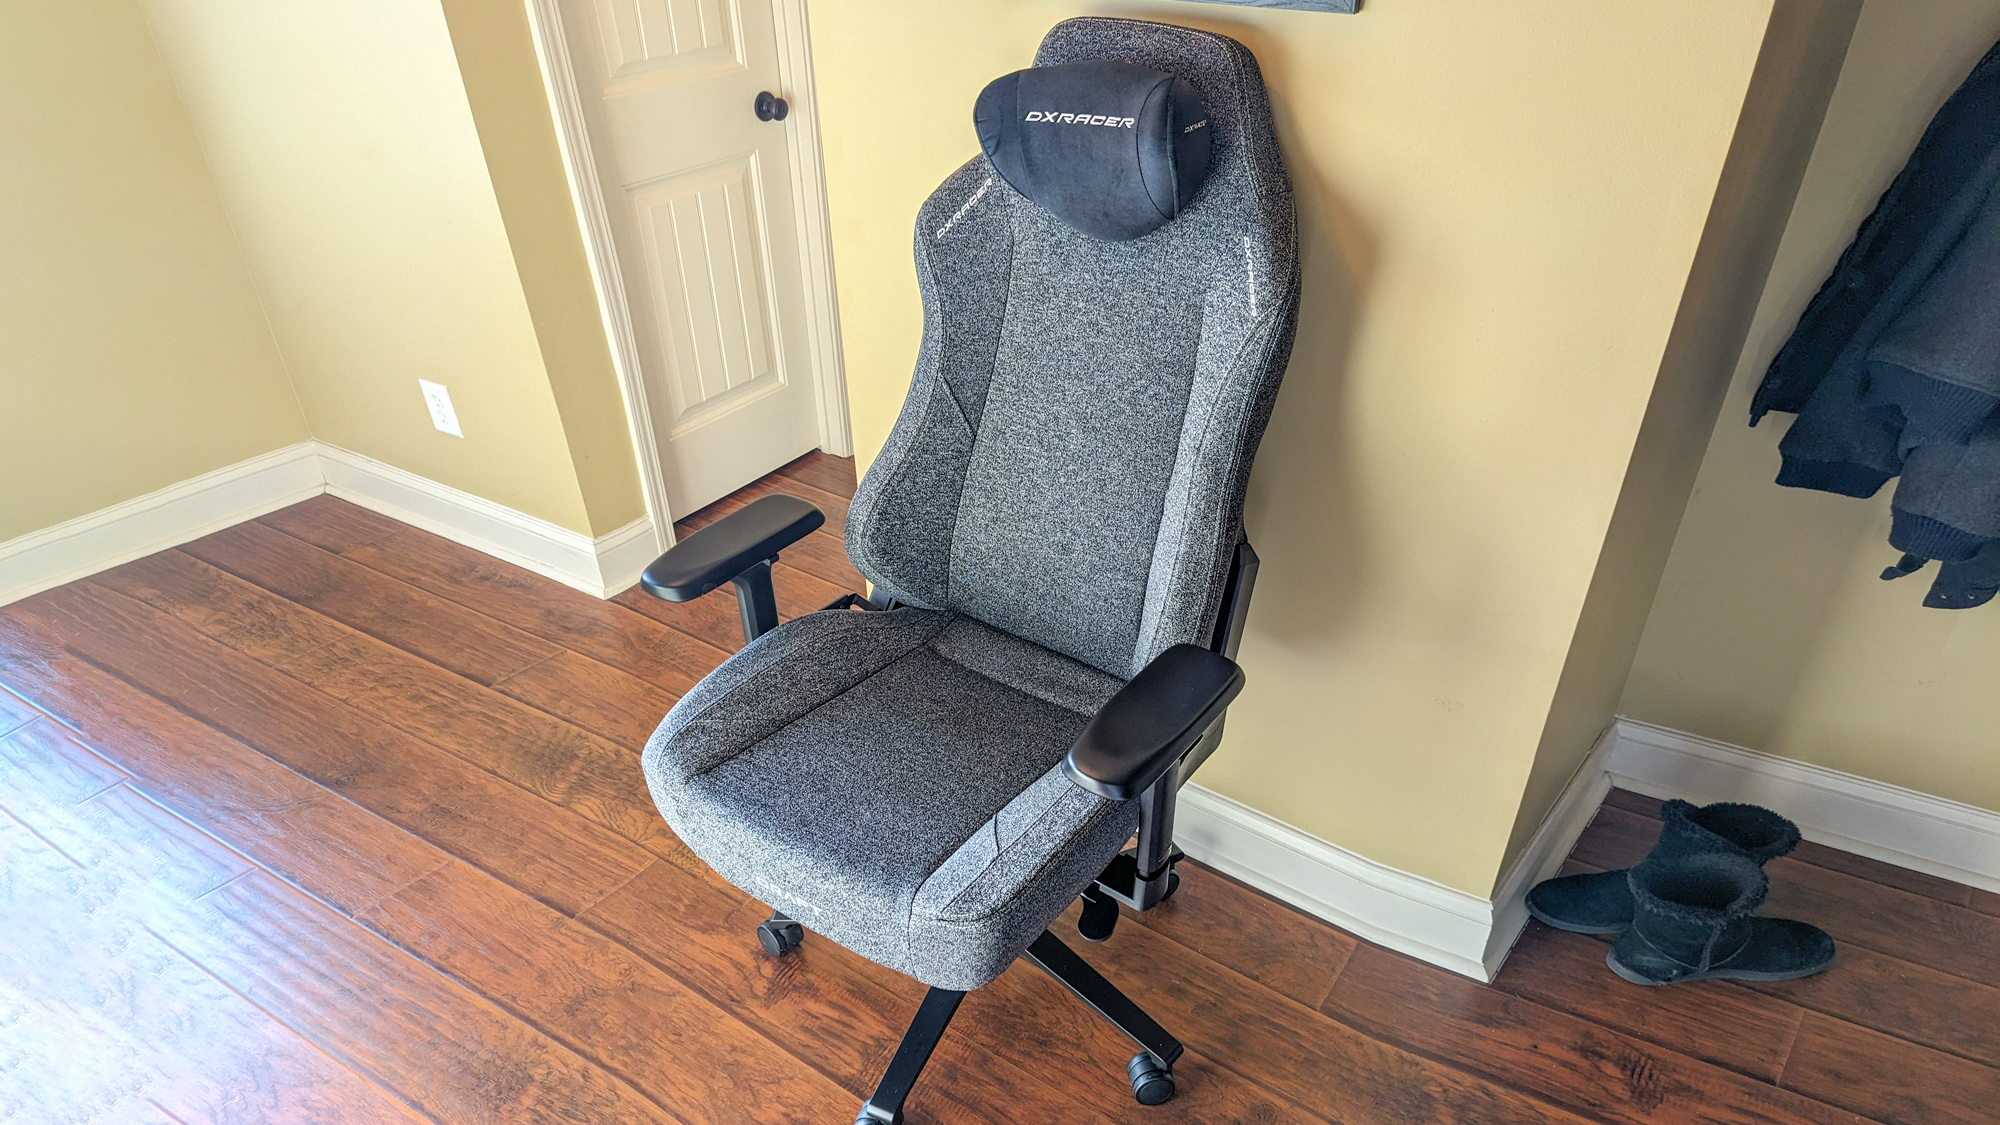 The fabric version of the DXRacer Craft up against a wall